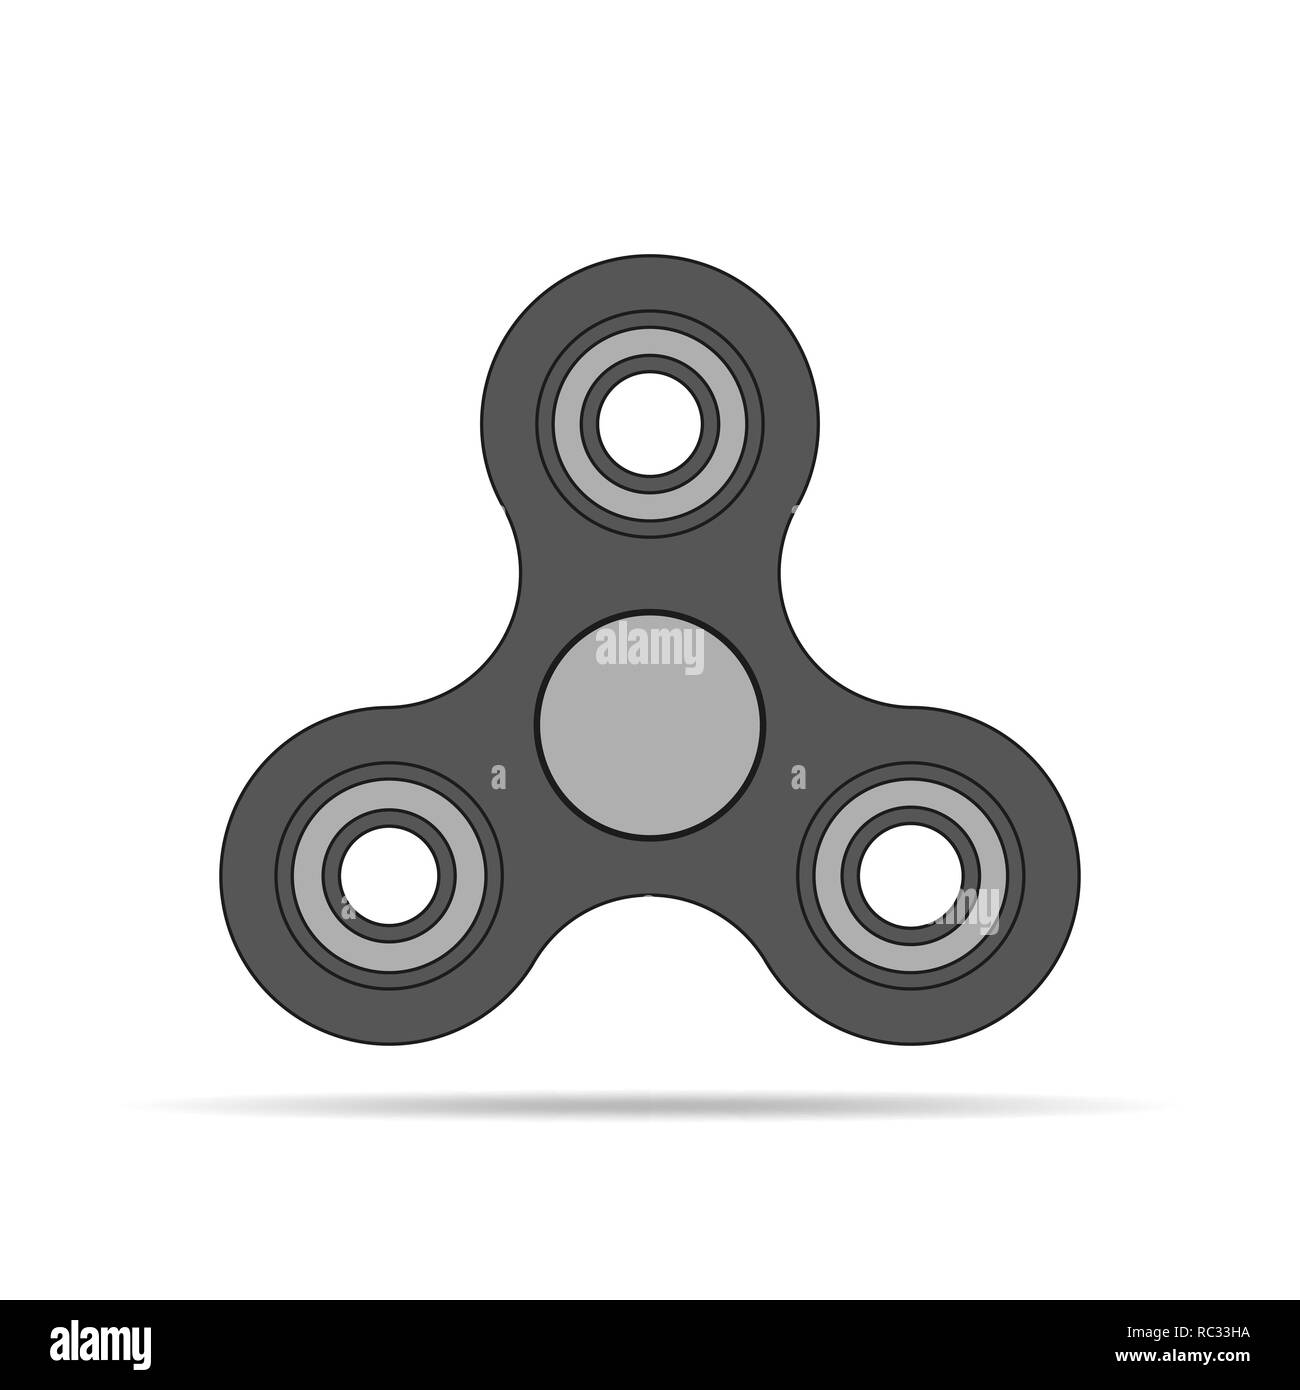 Hand spinner icon, isolated on white background. Vector illustration. Spinner stress relieving toy. Stock Vector